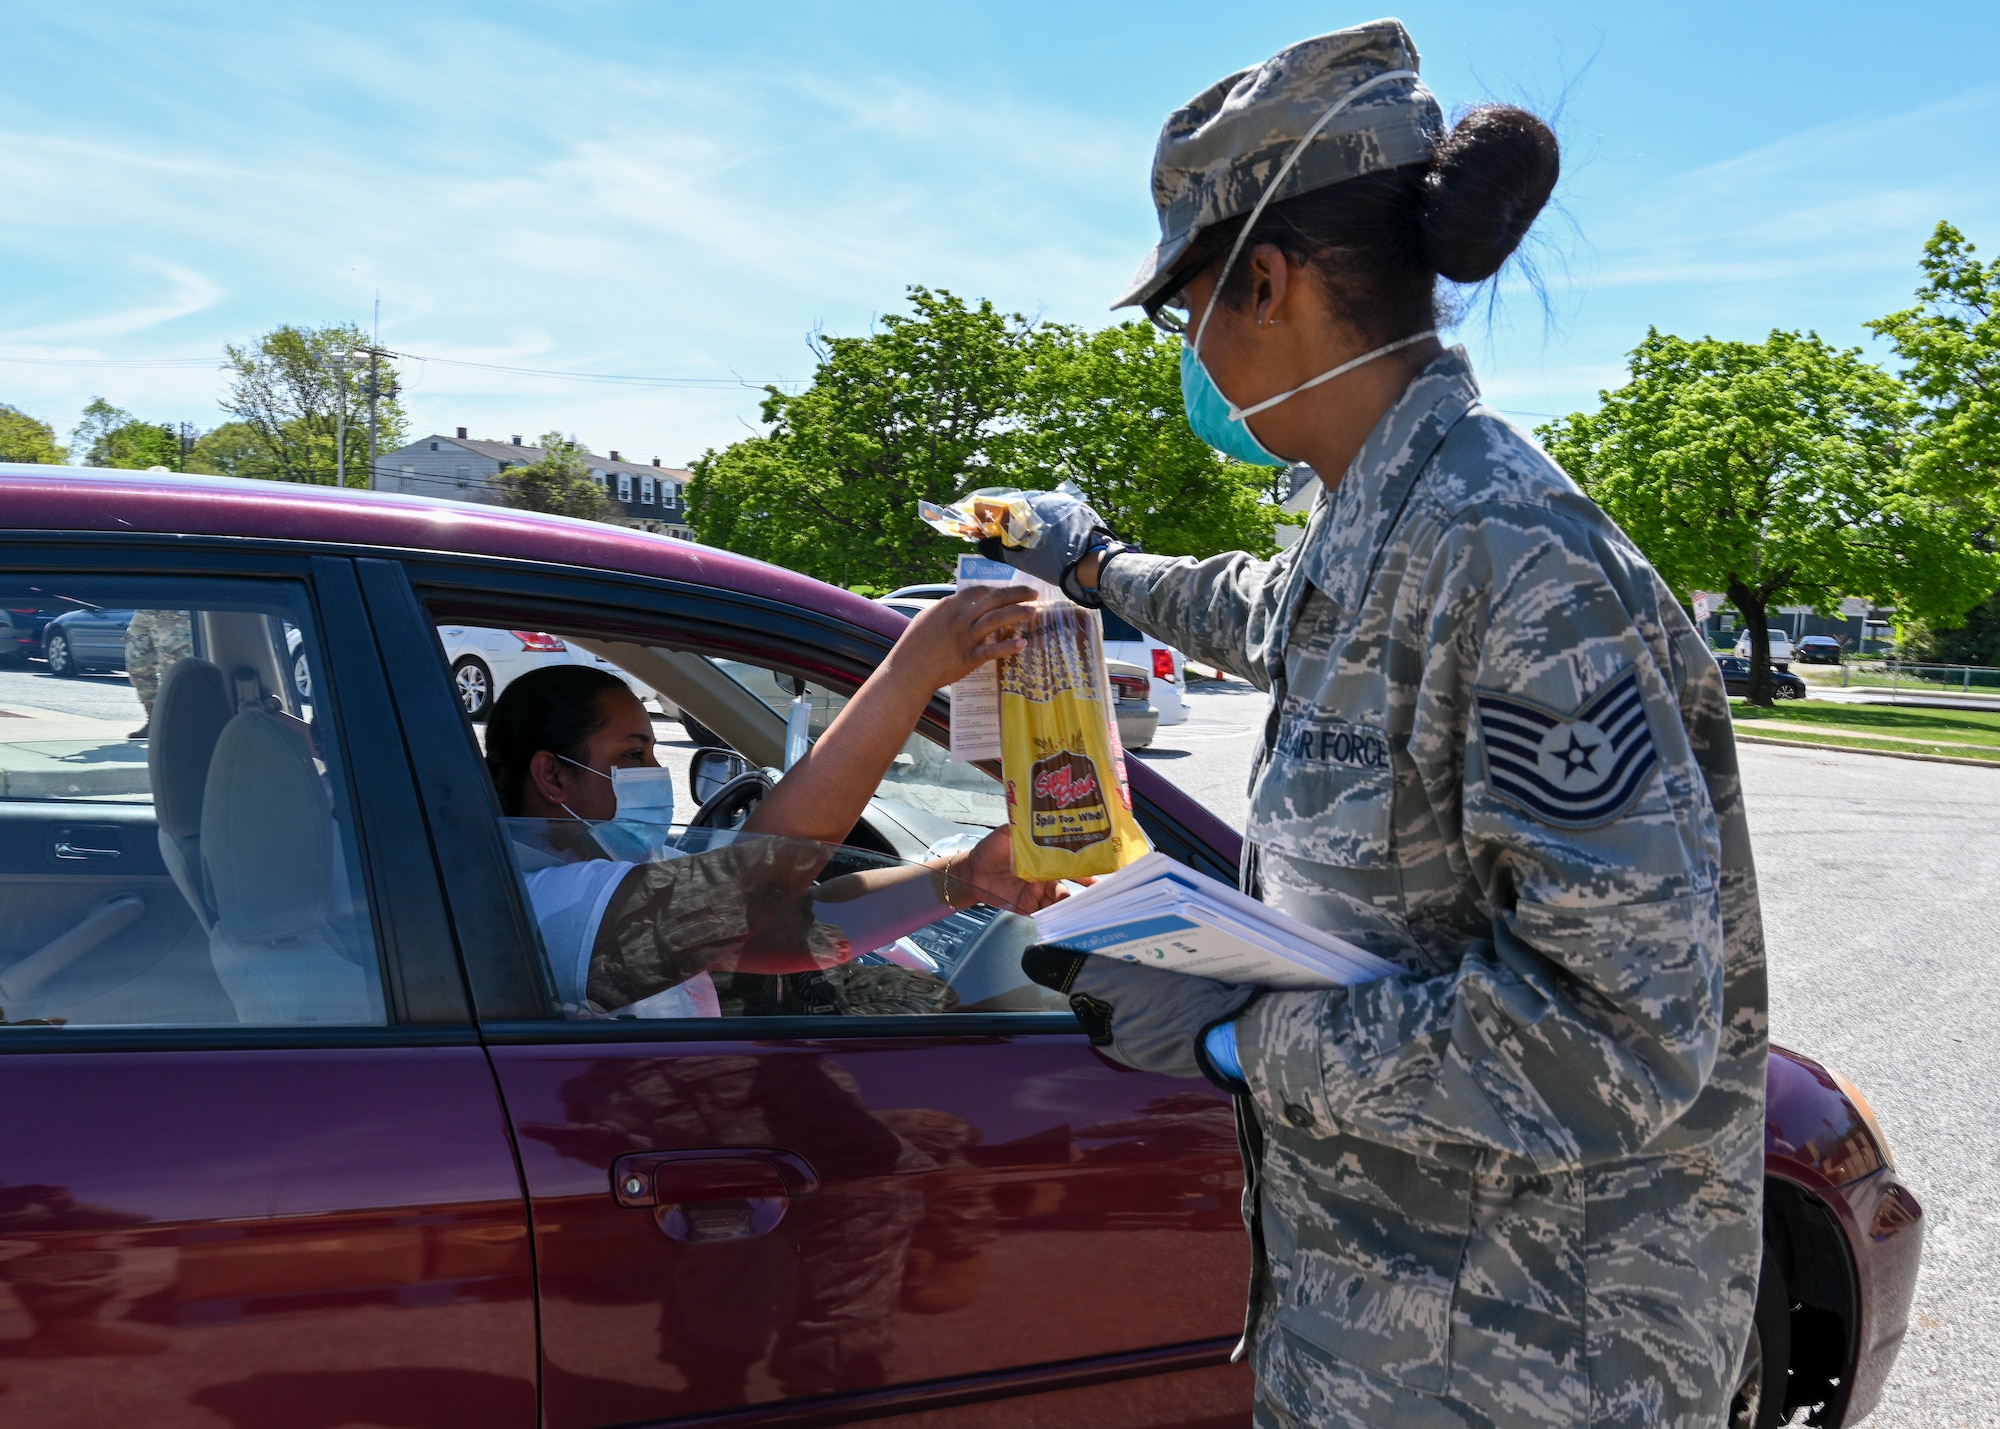 Technical Sgt. Erica Brown, command support staff assigned to the 235th Civil Engineer Flight, Maryland Air National Guard hands out bread to a member of the community while supporting efforts to distribute meals and groceries to local communities, May 2, 2020, Baltimore, Md. The program is designed to ensure citizens of the local community have food and groceries while schools and work places are closed. (U.S. Air National Guard photo by Tech. Sgt. Enjoli Saunders)